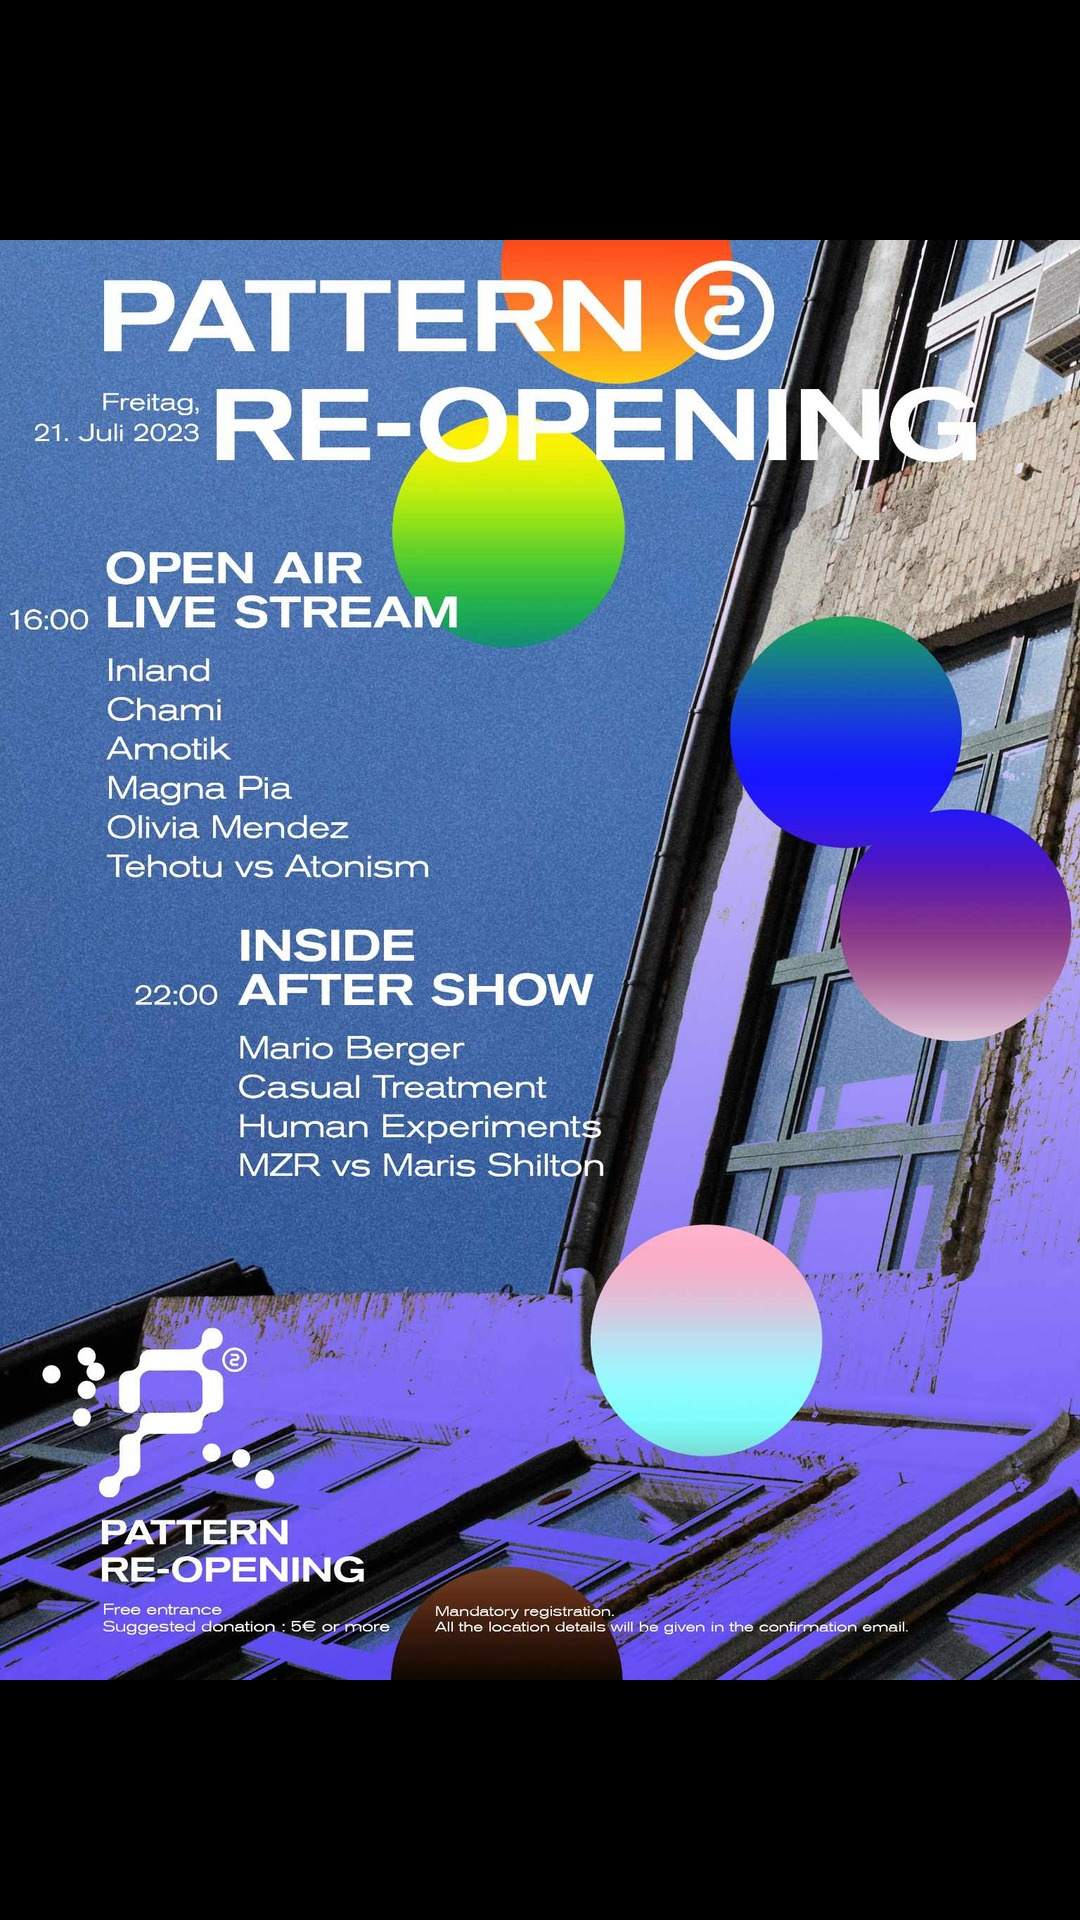  Pattern re-opening - Free entrance - フライヤー裏